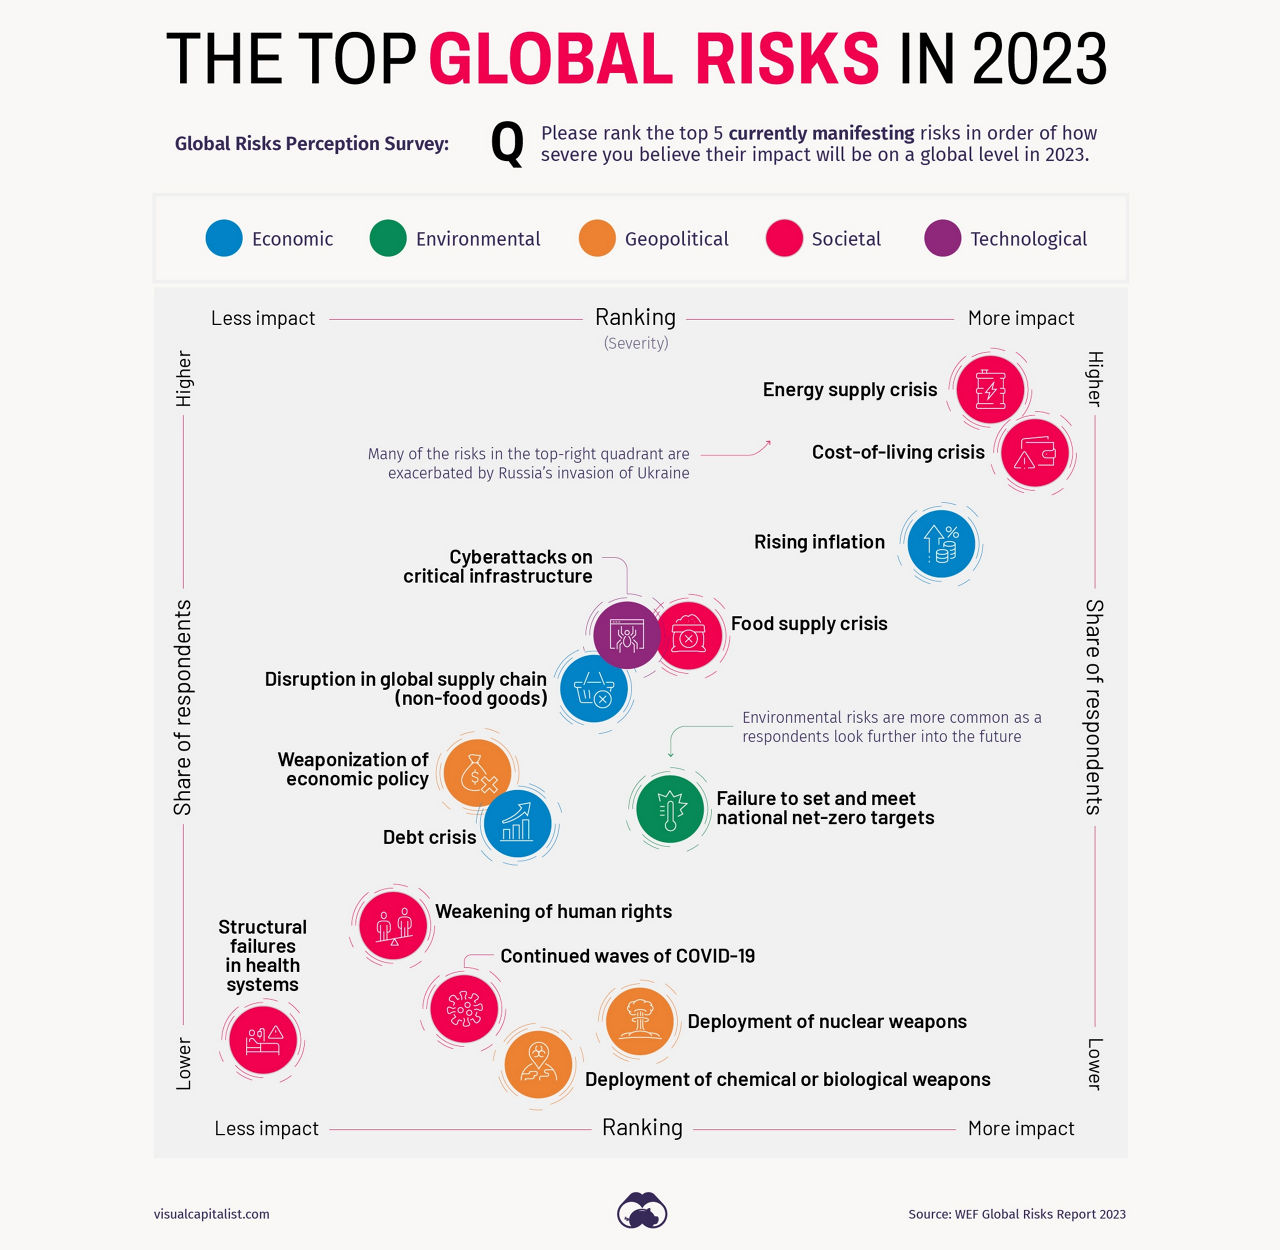 THE TOP GLOBAL RISKS IN 2023